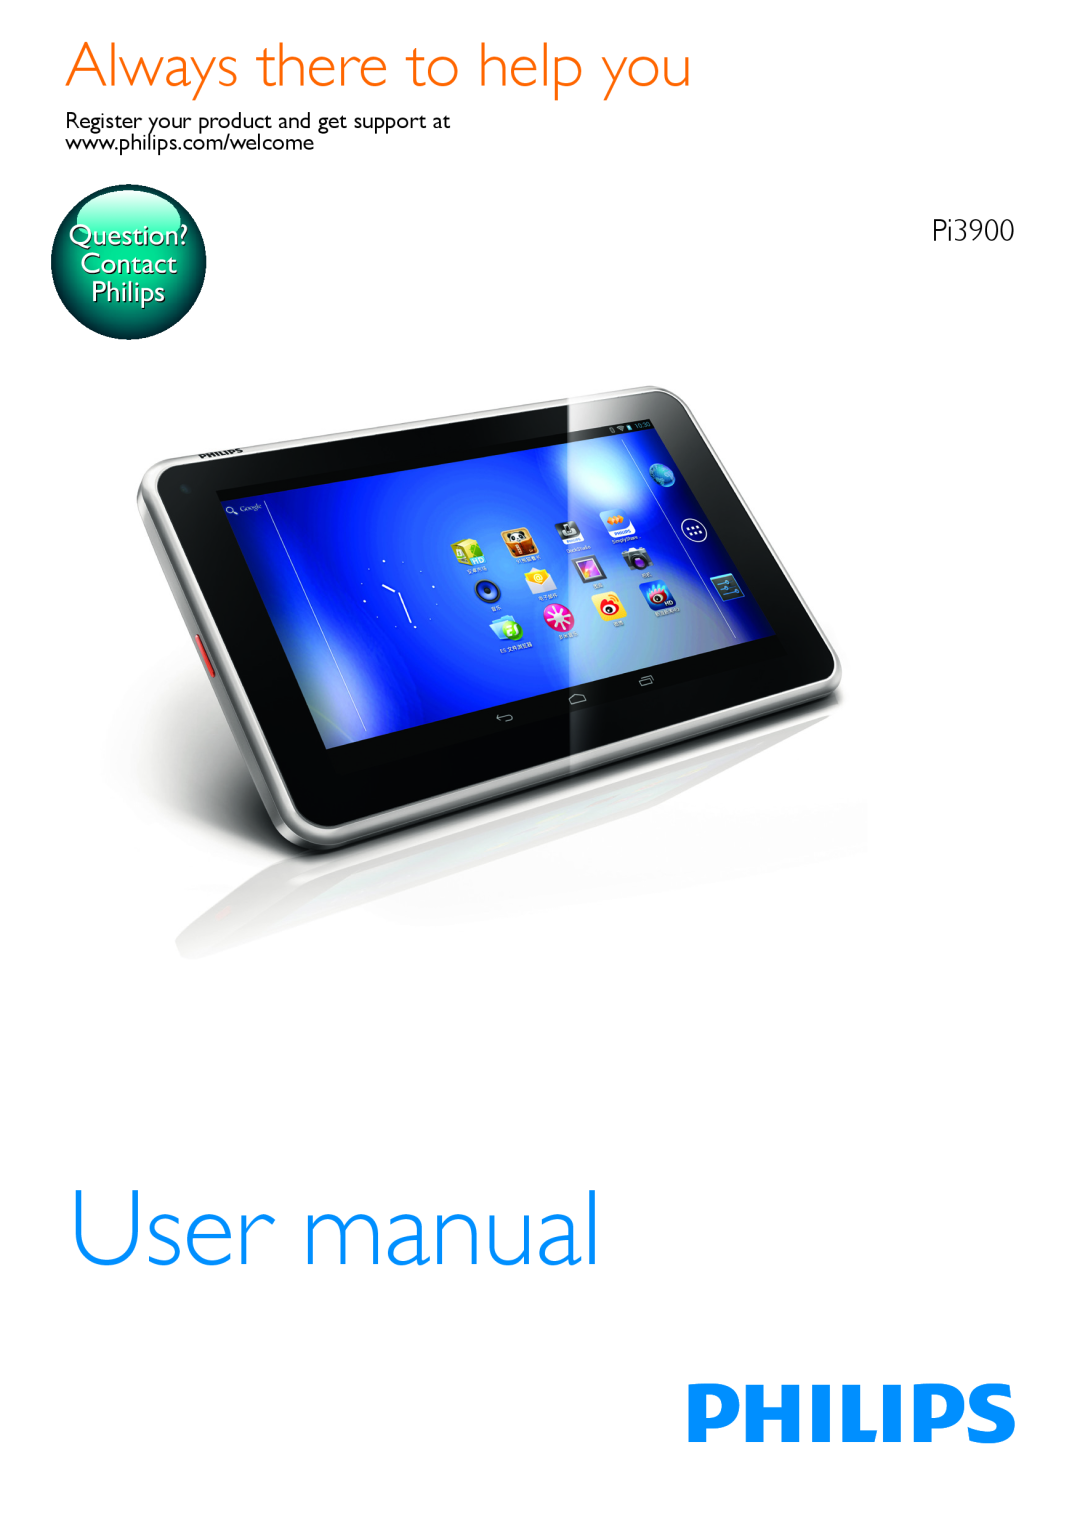 Philips PI3900 manual Pi3900, User manual, Always there to help you, Question?, Contact Philips 